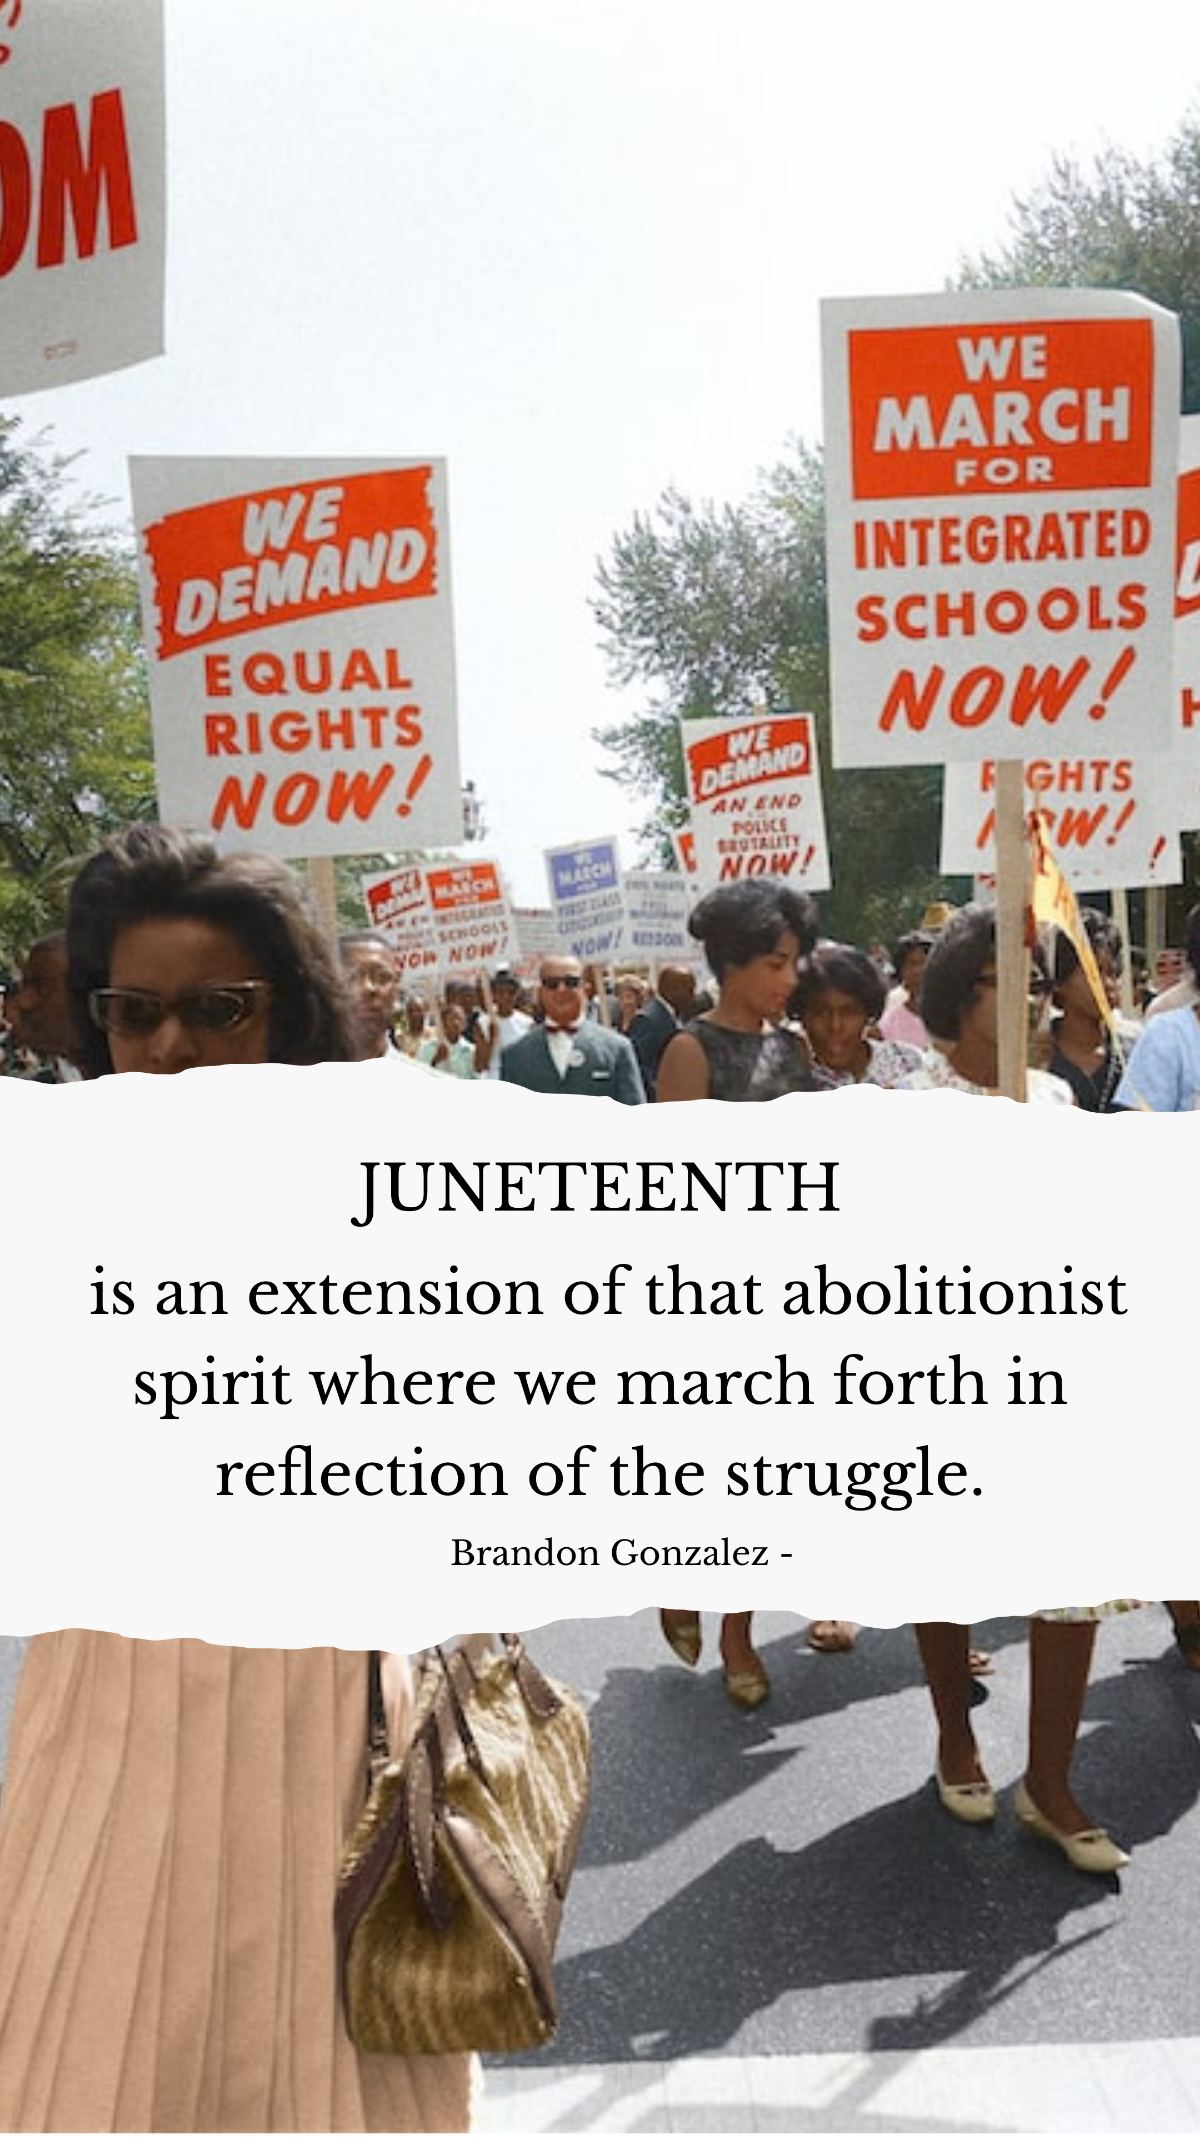 Brandon Gonzalez - Juneteenth is an extension of that abolitionist spirit where we march forth in reflection of the struggle. Template